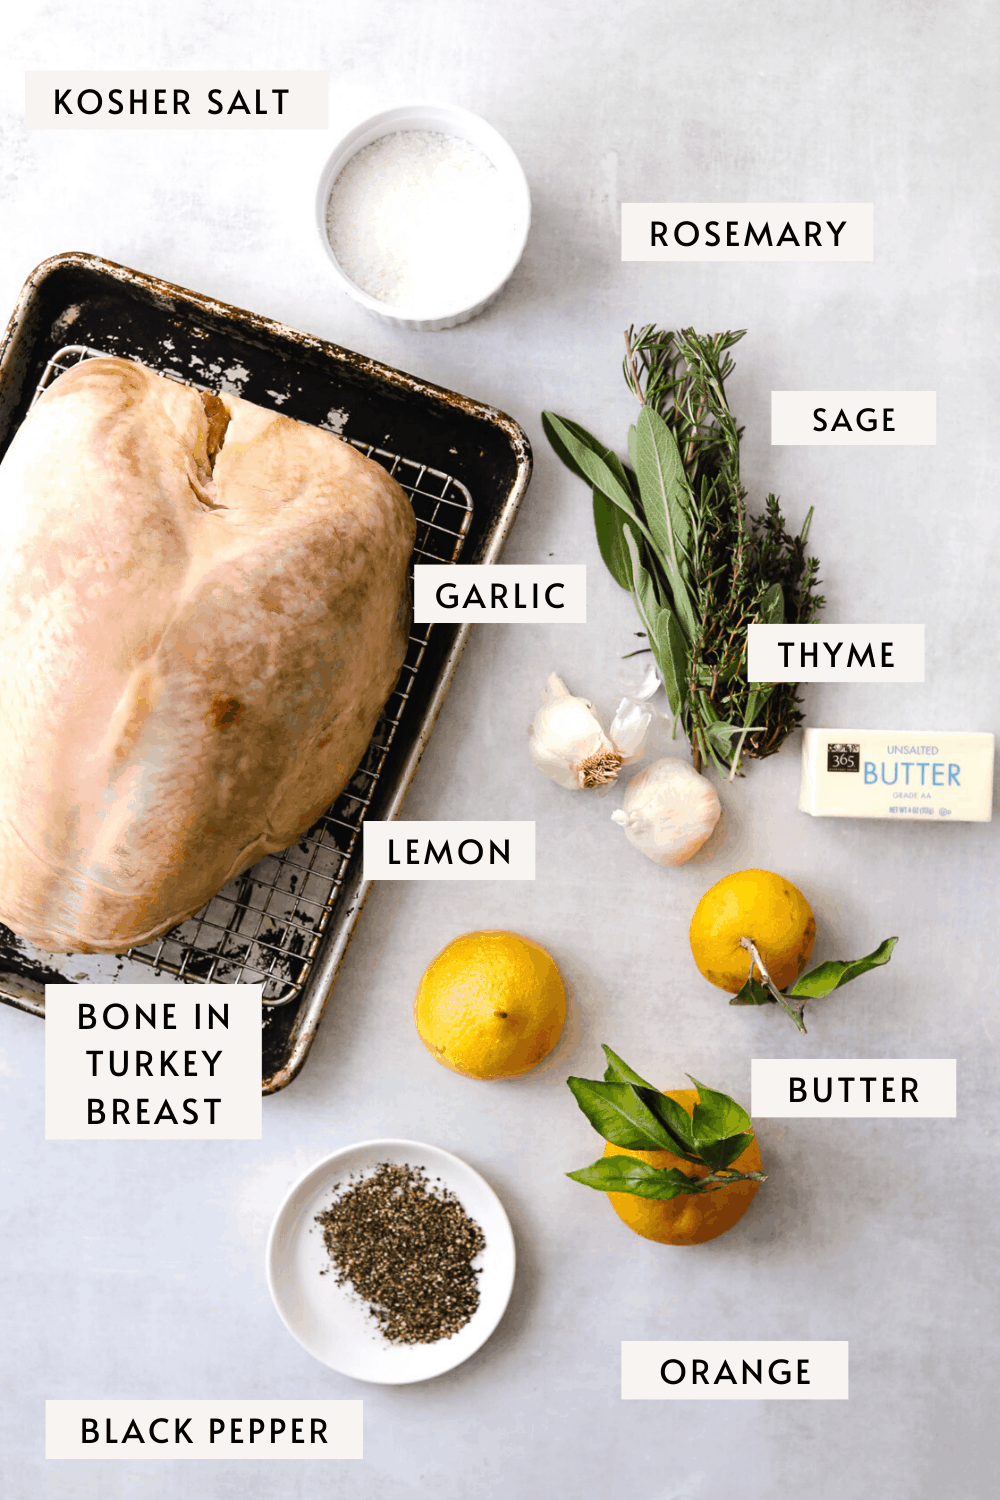 recipe ingredients, a large raw turkey breast on a baking tray, orange, fresh sage, thyme and rosemary, black pepper 